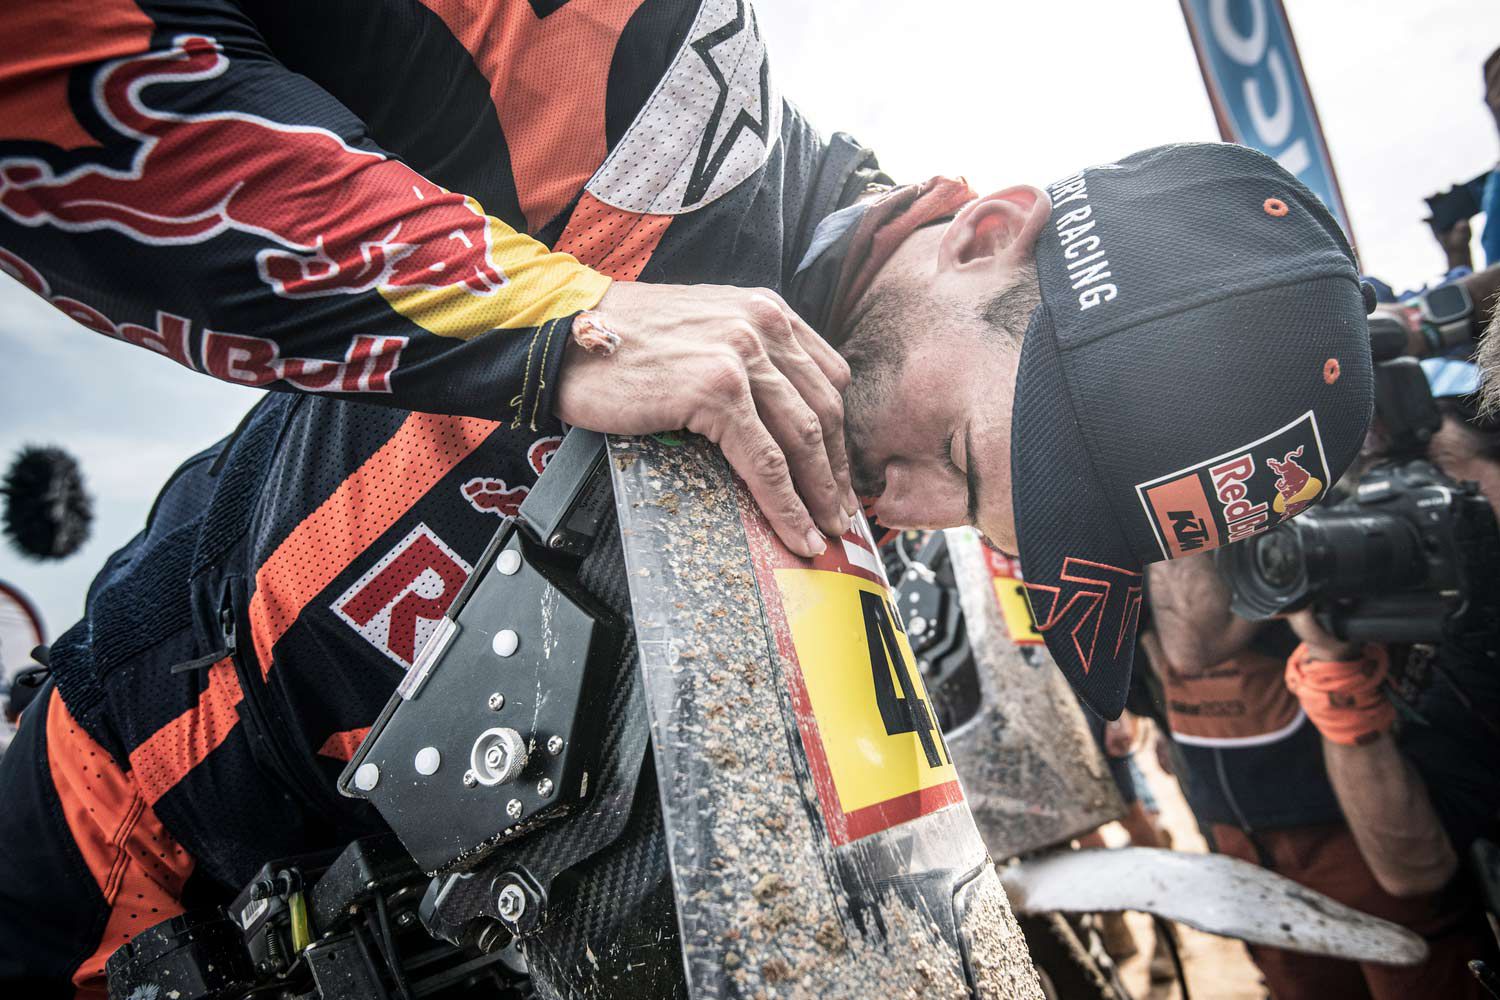 The romance of victory: Kevin Benavides, Red Bull KTM Factory Racing, gives his winning KTM a smooch after Stage 14, Dammam, Saudi Arabia.